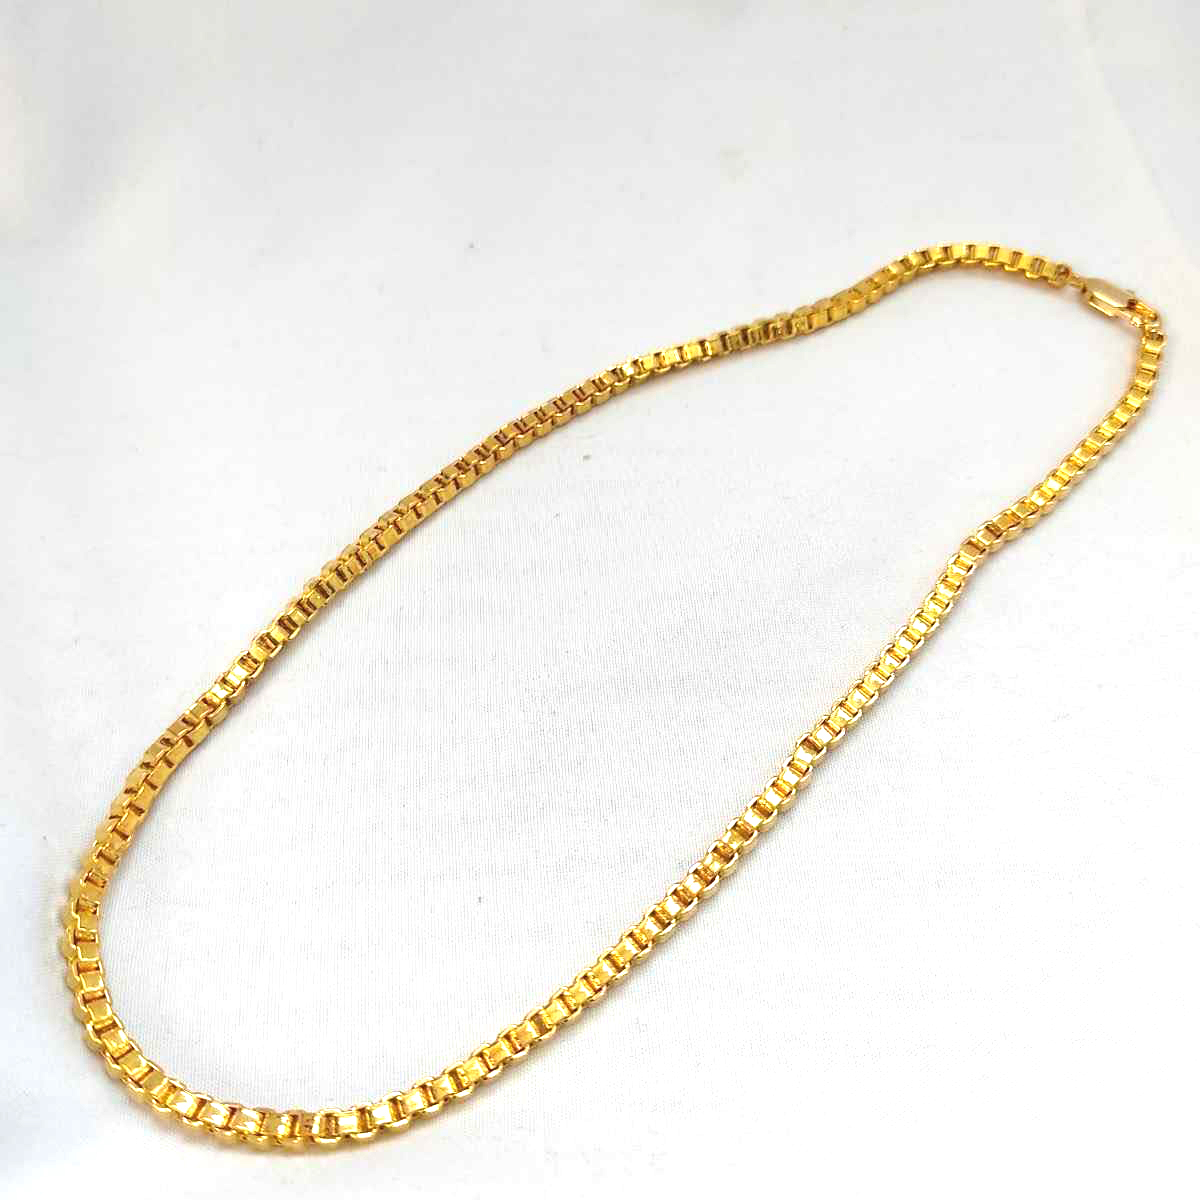 men's necklace GOLD chain 18k 刻印 ゴールドネックレス 金ネックレス 18kgp 鍍金 307の画像2